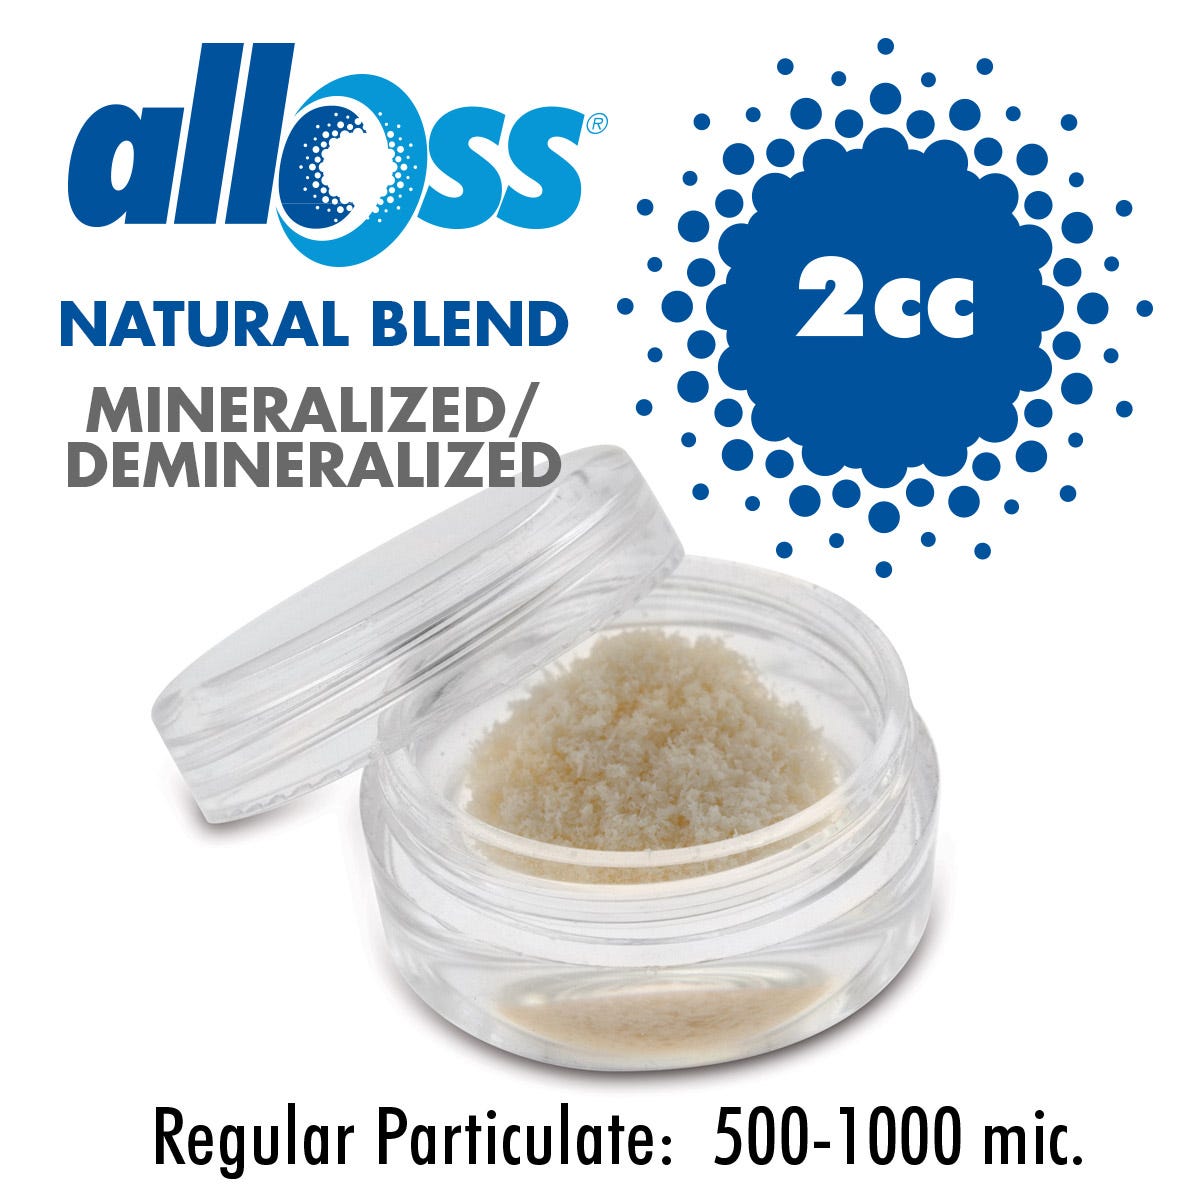 alloOss® Natural Blend Mineralized/Demineralized Particulate 500-1000um (2.0cc)